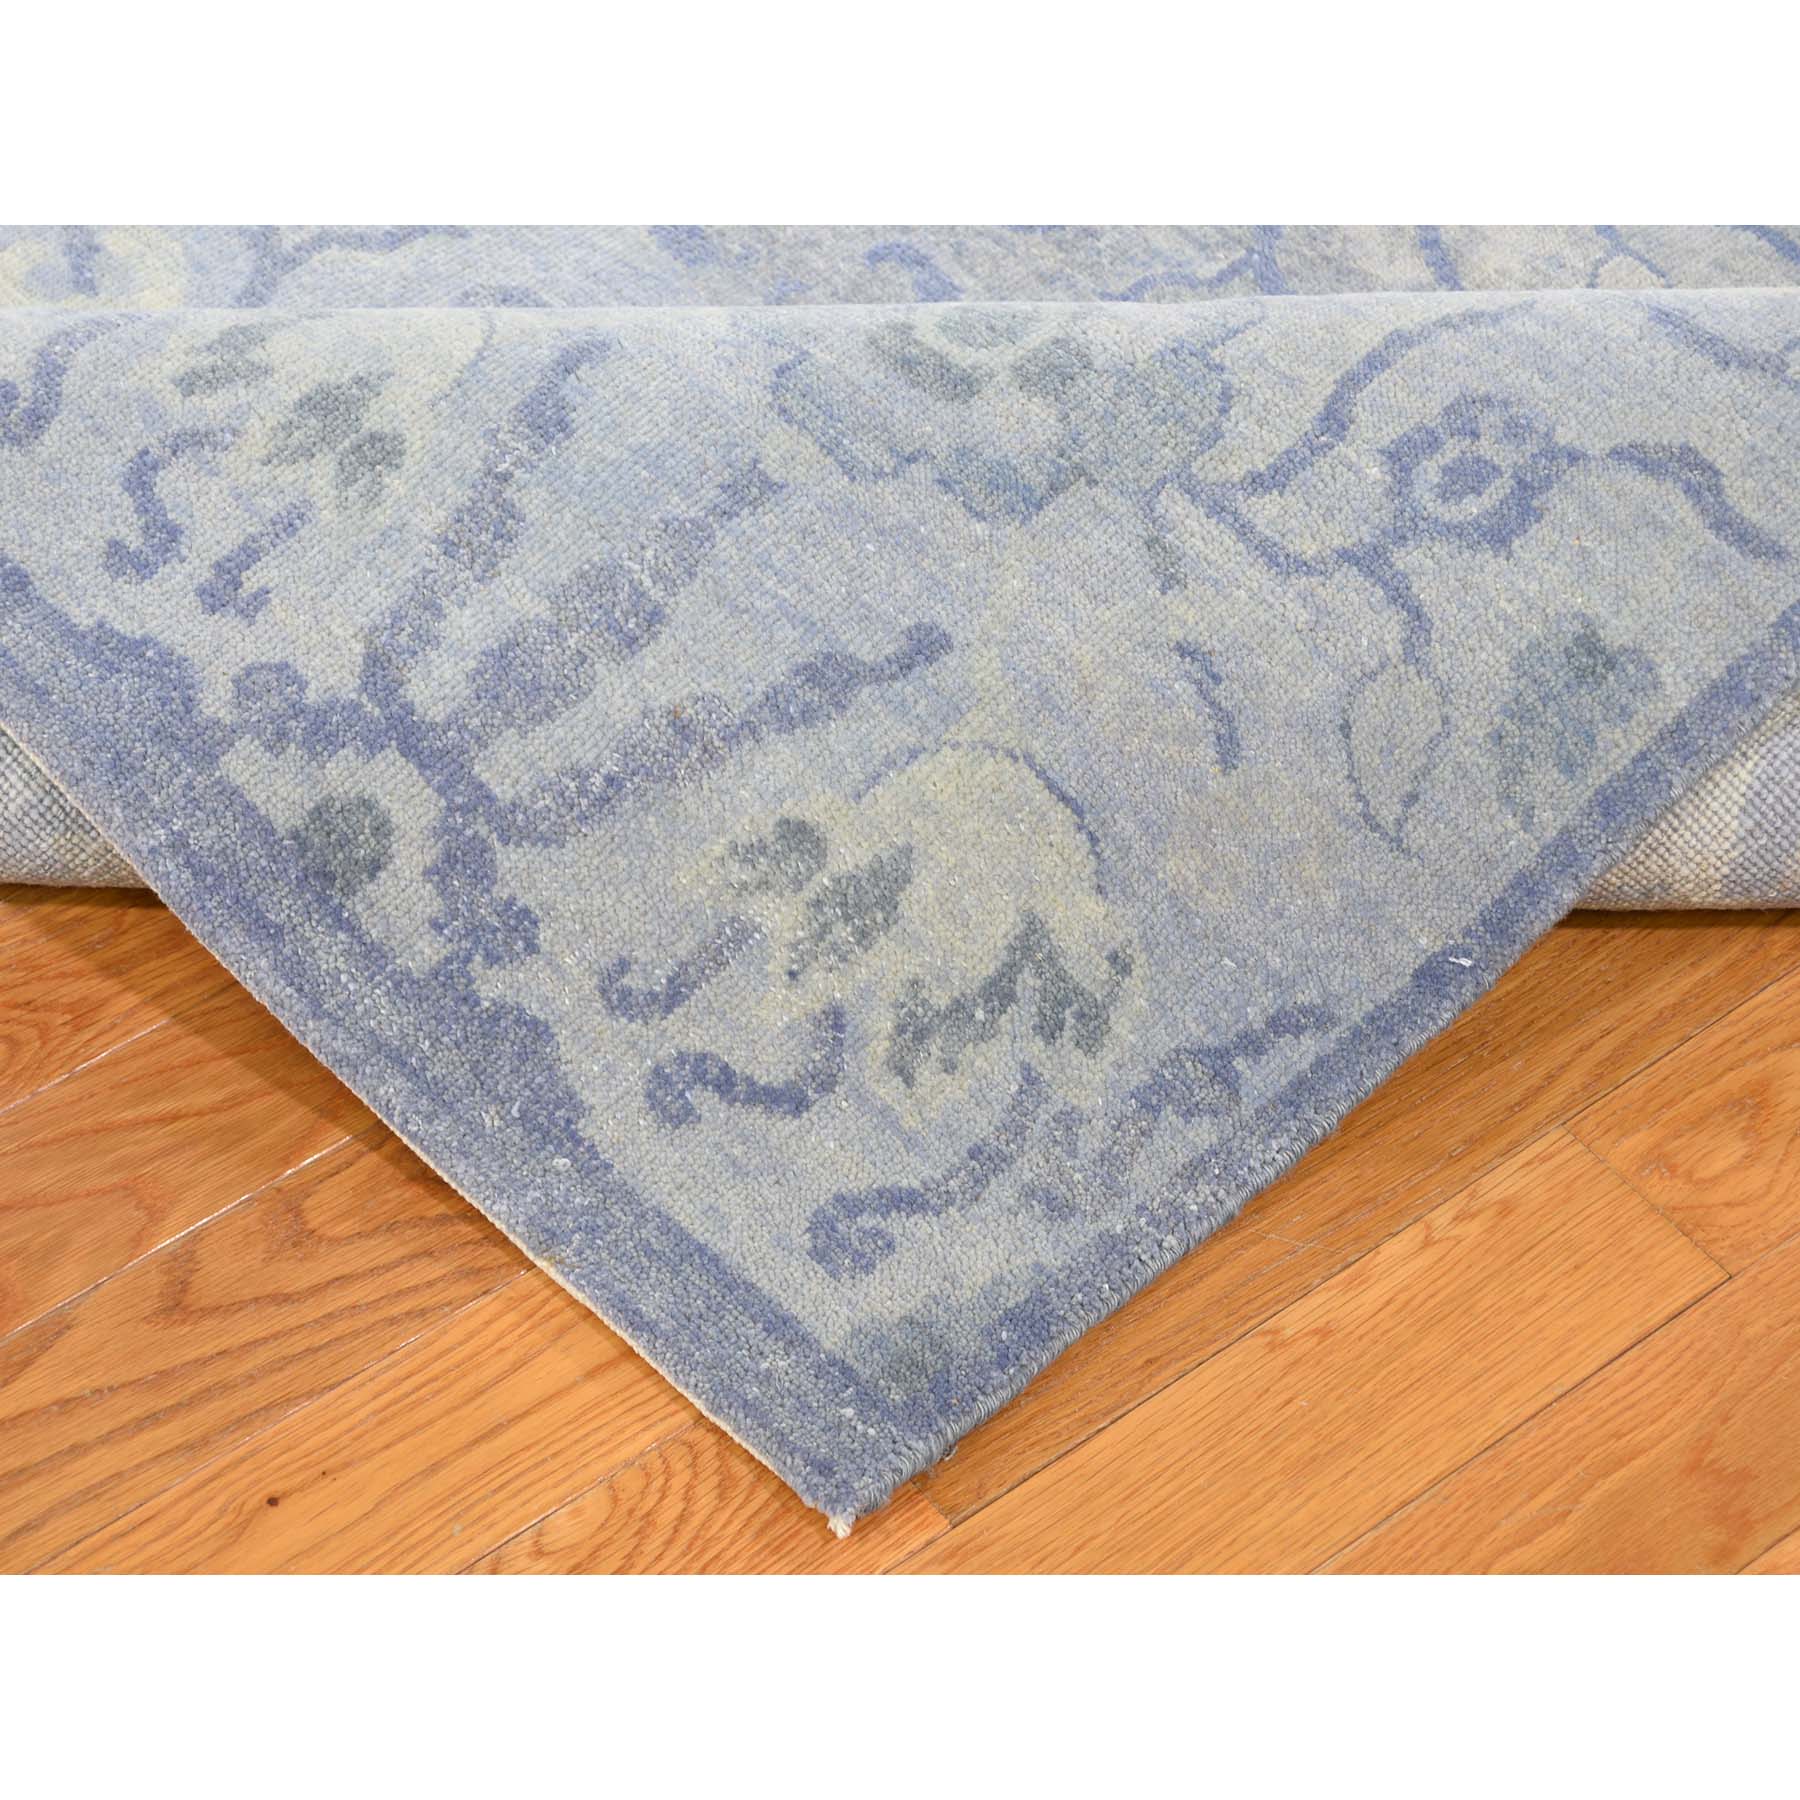 8-x9-10  Modern Light Blue Tone on Tone Pure Wool Hand-Knotted Oriental Rug 